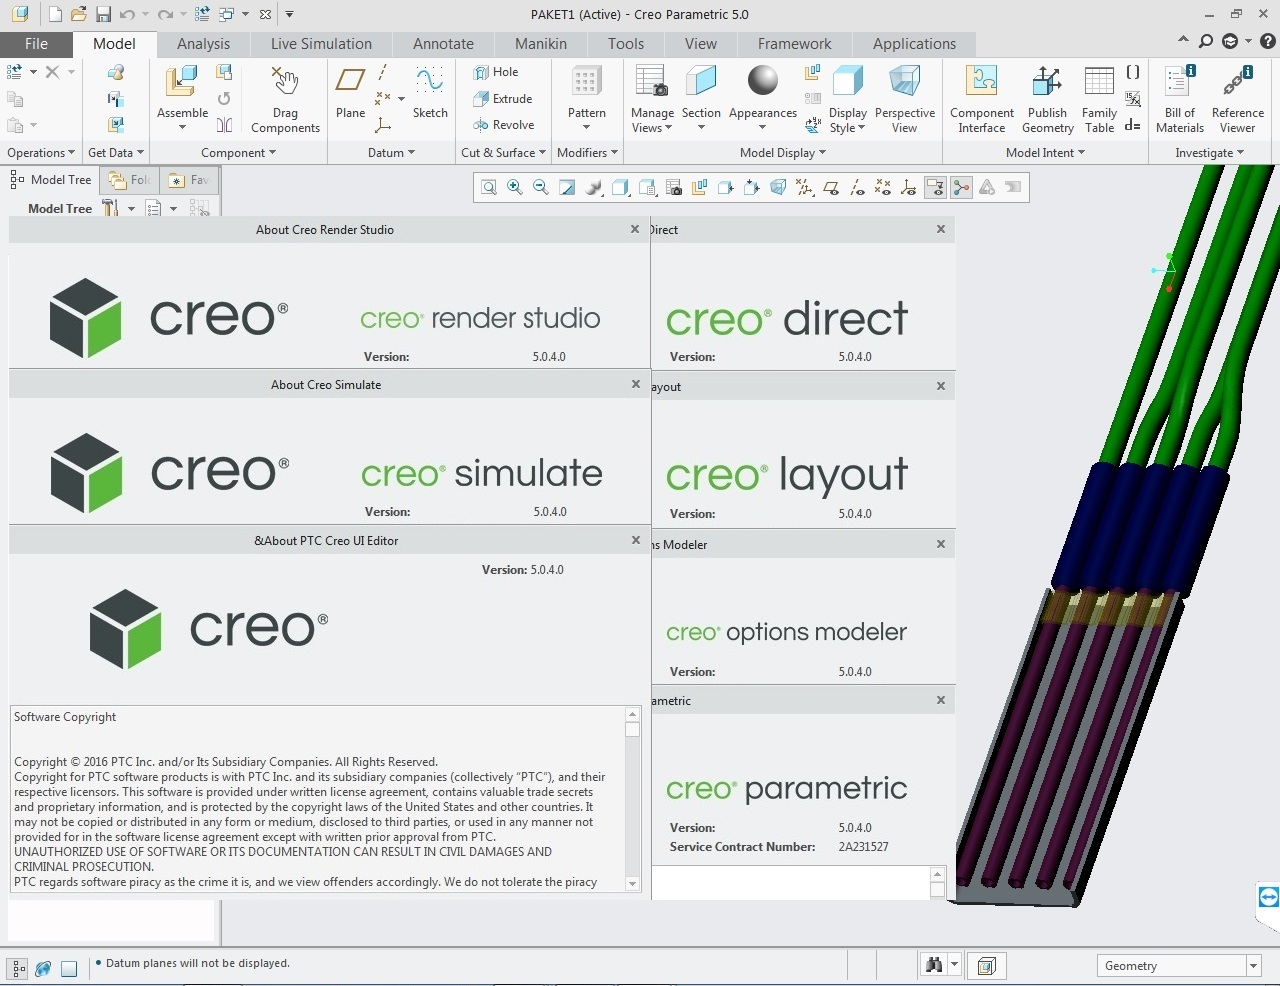 Working with PTC Creo 5.0.4.0 full license forever